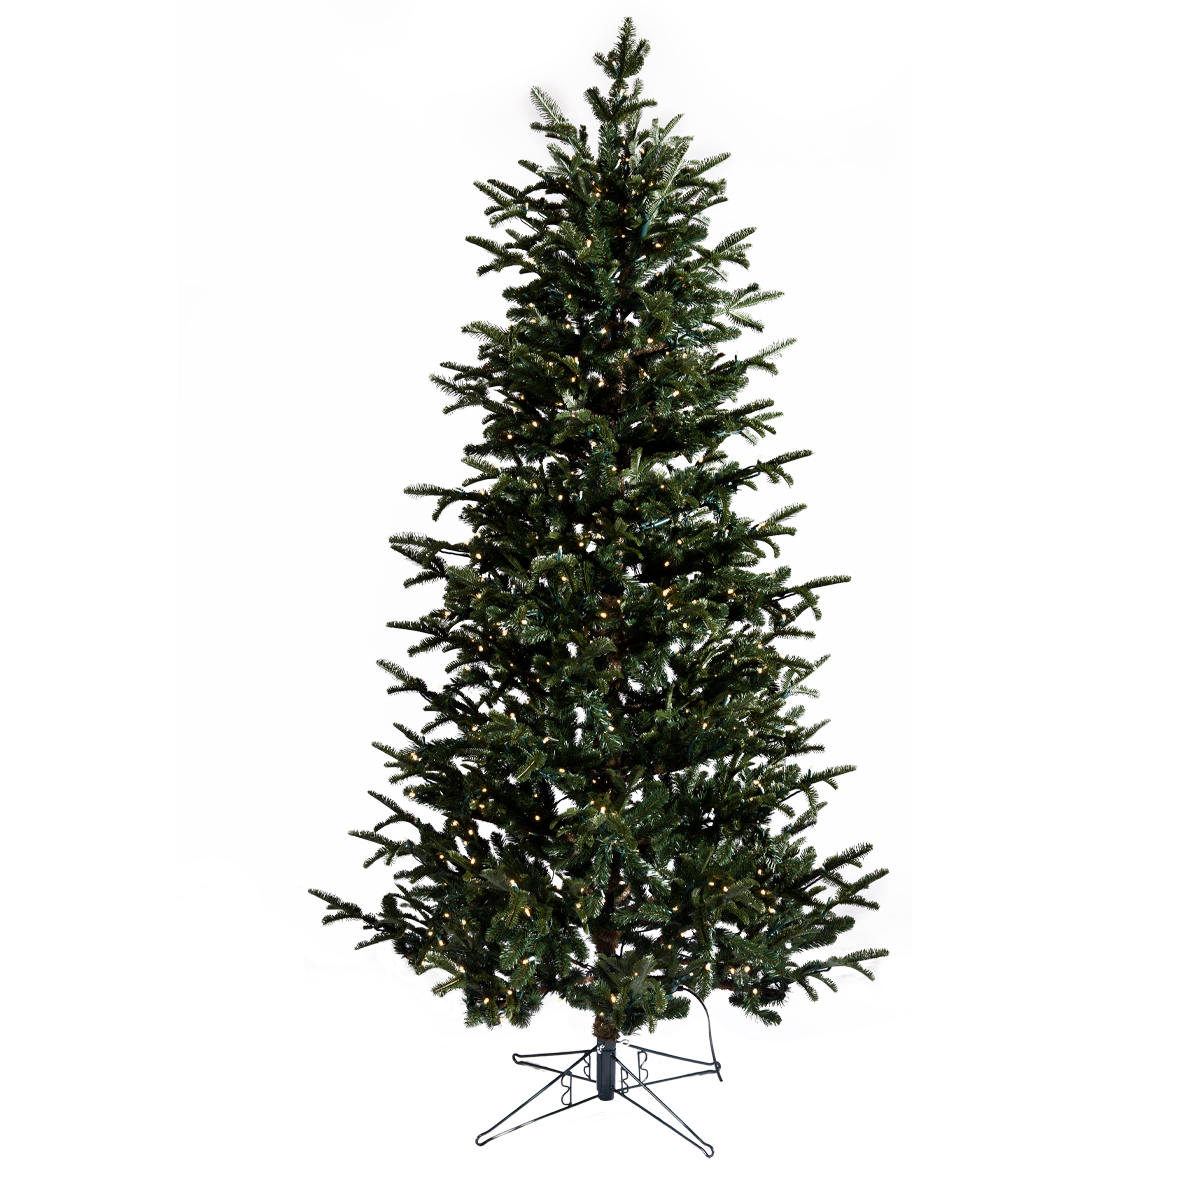 Star Fir Deluxe Christmas Tree - Pencil Frame - Warm White LEDs - One-Plug Pole - 7.5ft Tall